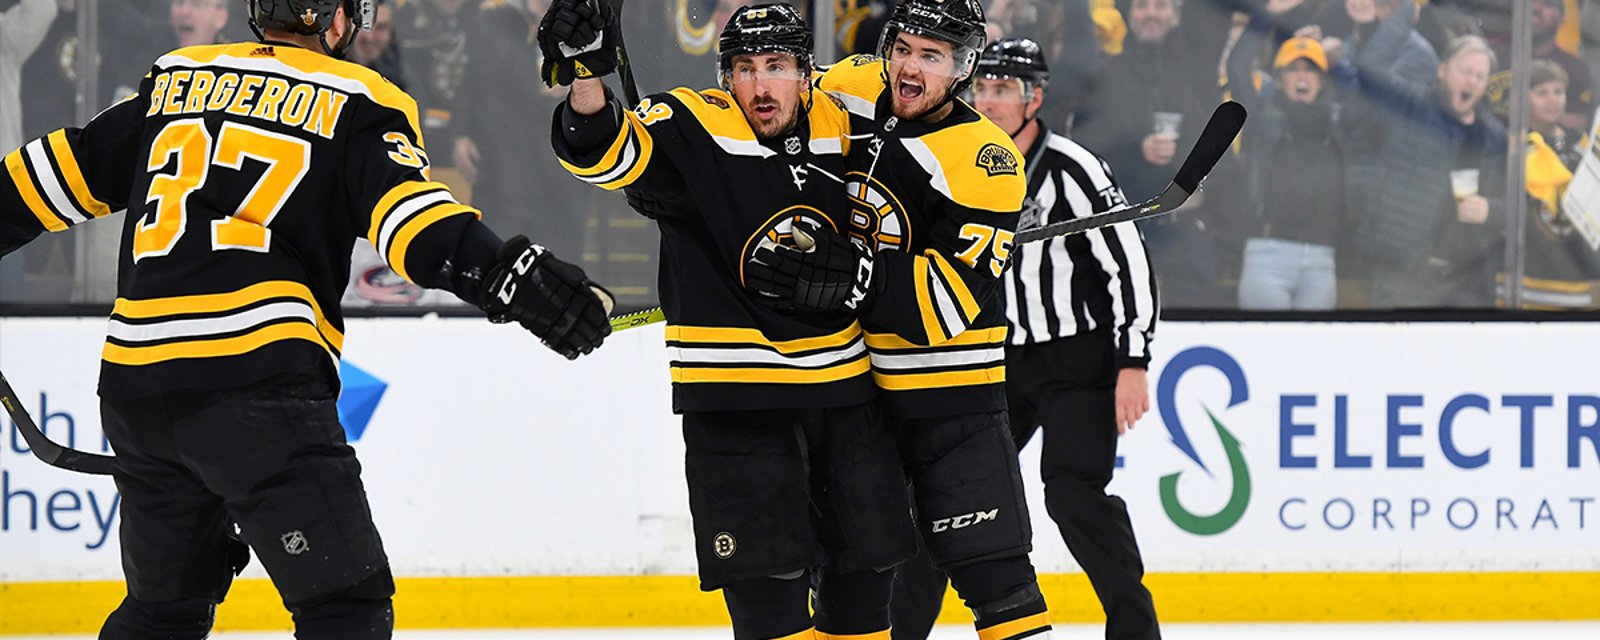 Gameday Report: Bruins lineup for pivotal Game 3